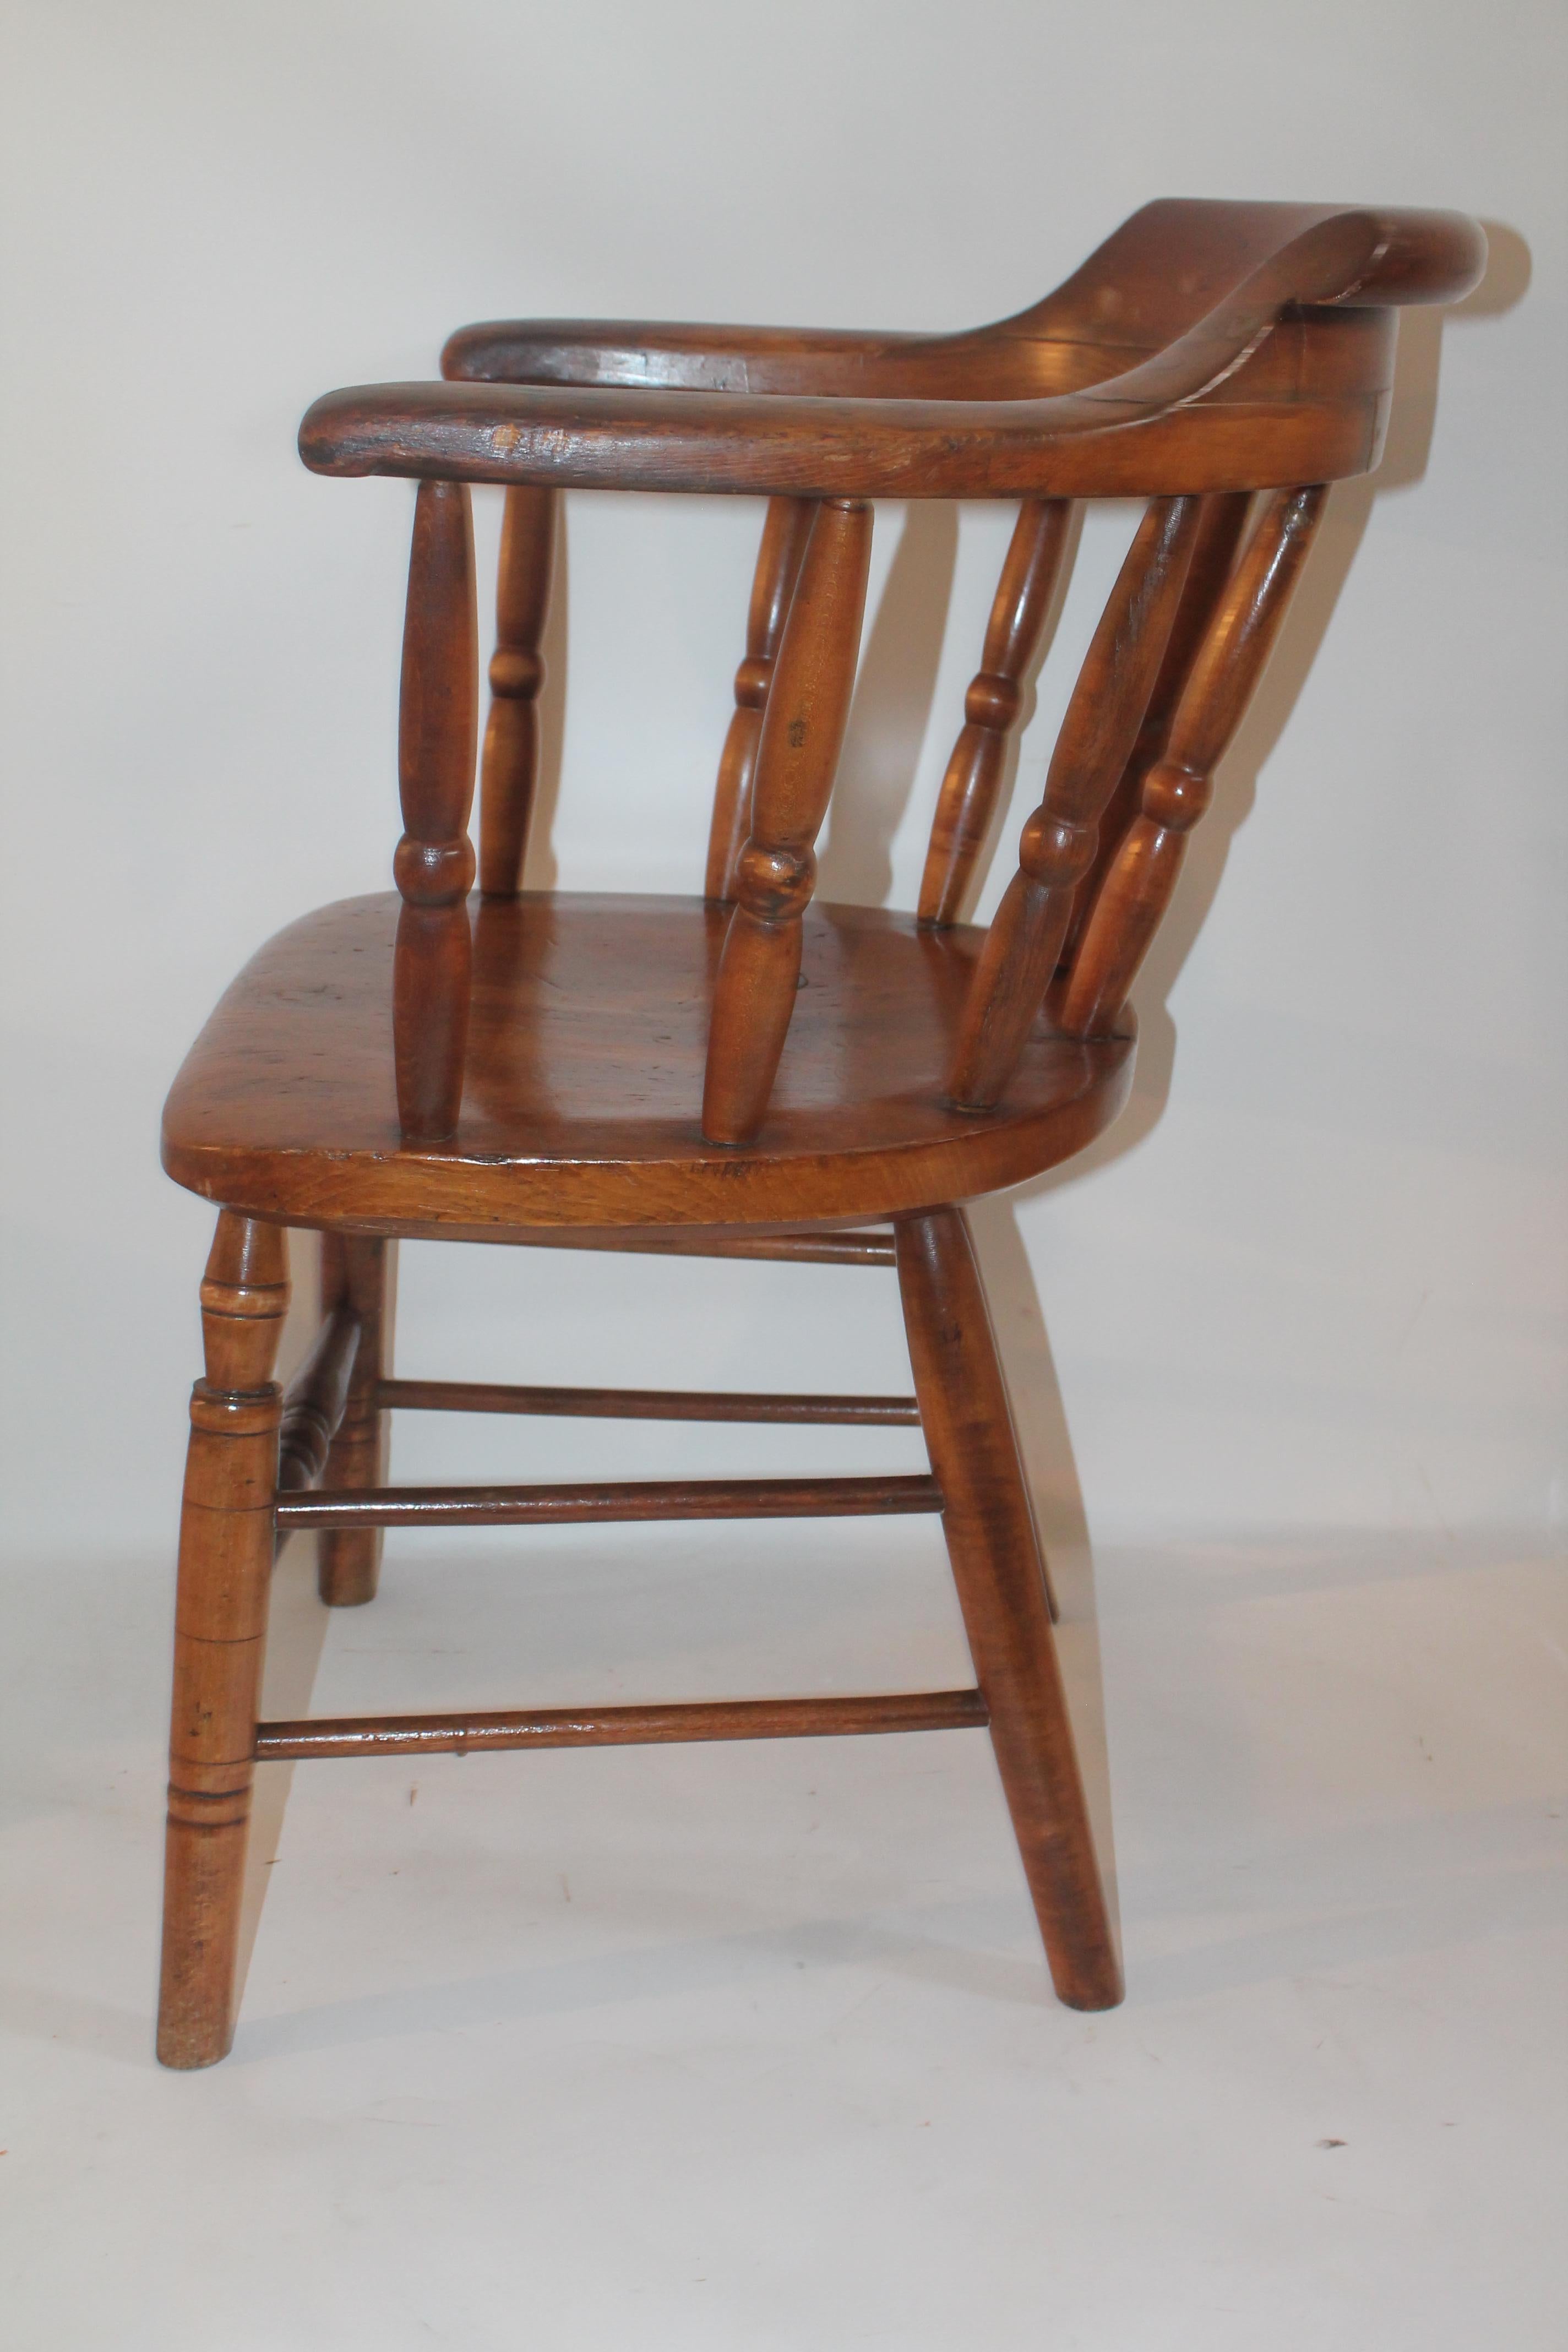 Hand-Crafted 19th Century American Pub or Captains Chairs / Pair